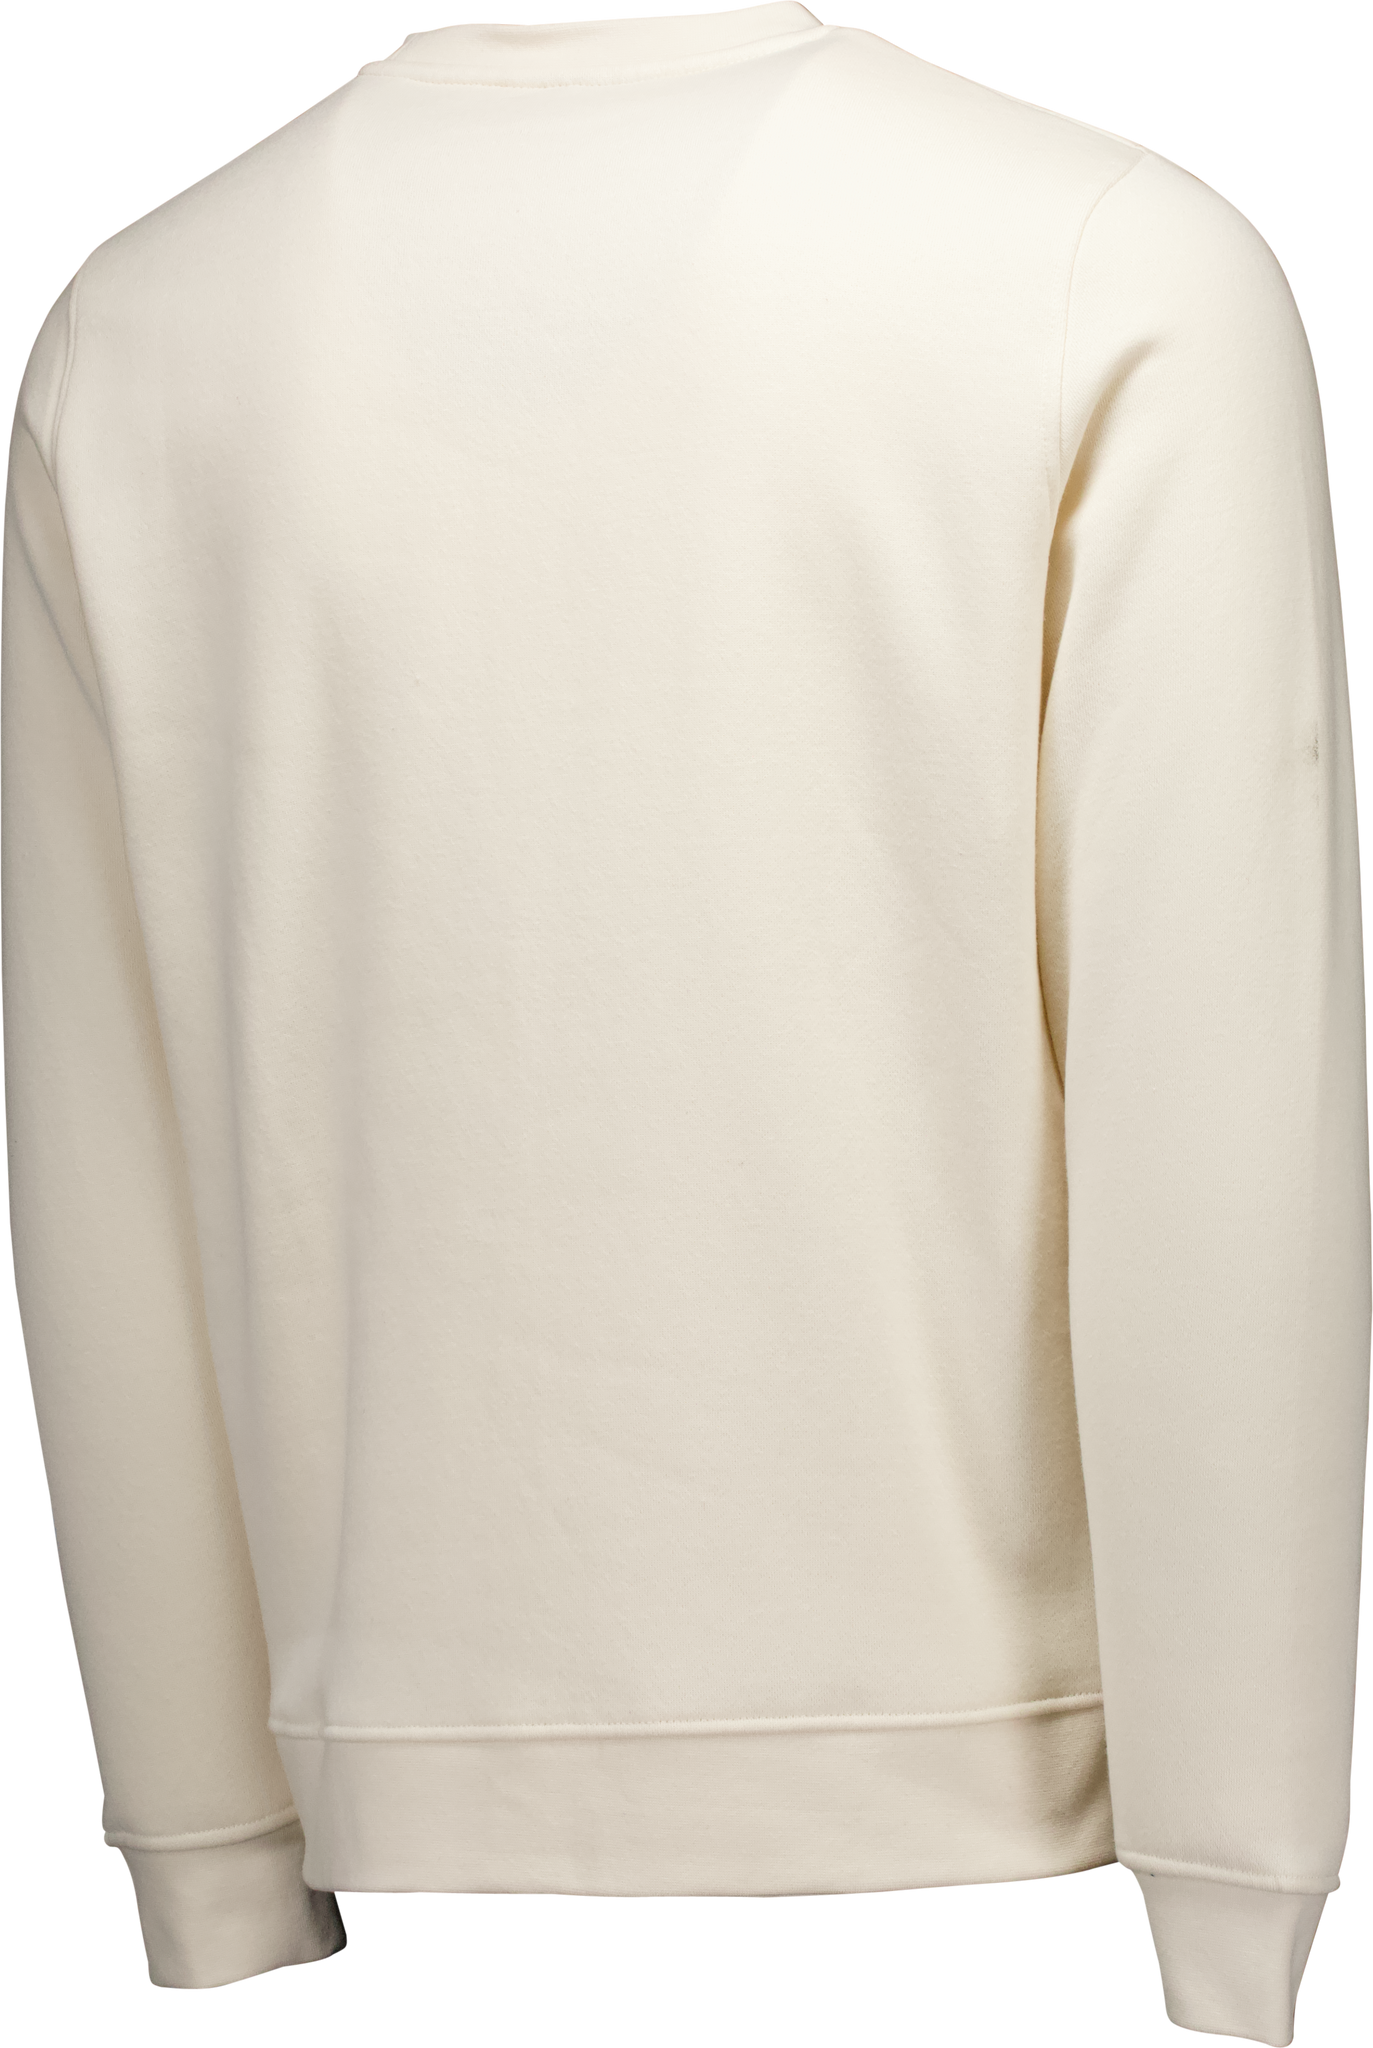 Angel City FC Unisex Off-White Embroidered Crewneck Sweater